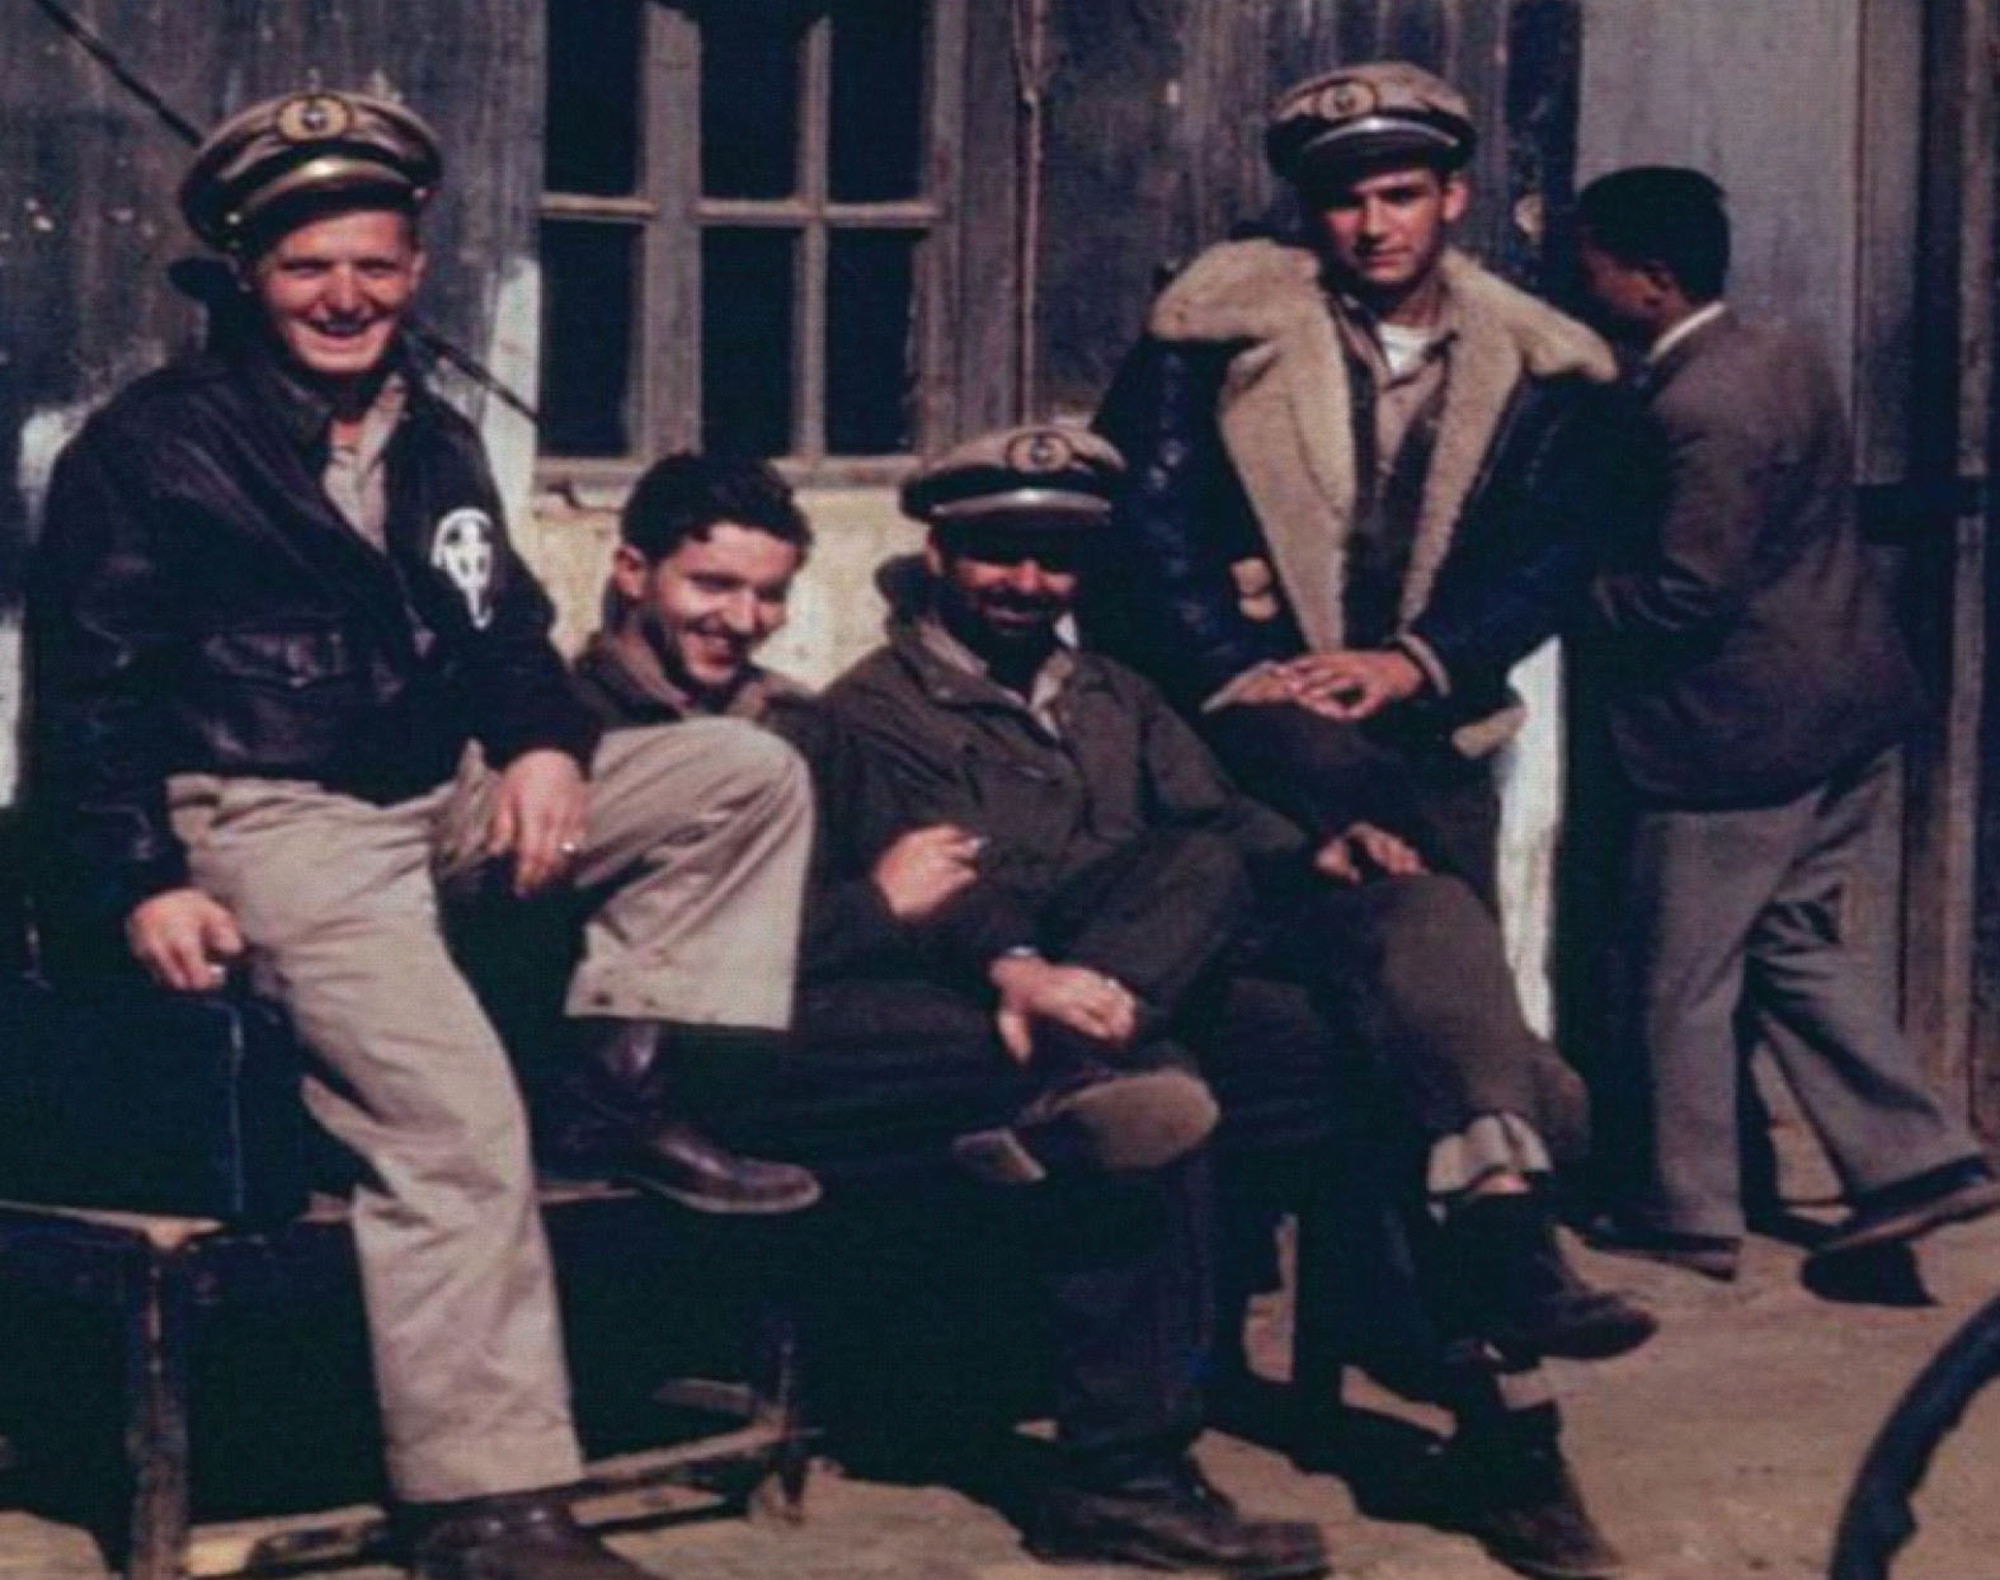 China National Aviation Corporation (CNAC) cargo crews wore a variety of uniform items. Capt. Steve Kusak (left) is wearing the typical flight uniform of khaki shirt and pants, Wellington boots, USAAF A-2 leather flight jacket with "Chung," and CNAC uniform hat. The others are using USAAF A-4 flight suits over their uniforms with a B-3 flight jacket being worn on the right. (Photo courtesy of cnac.org)